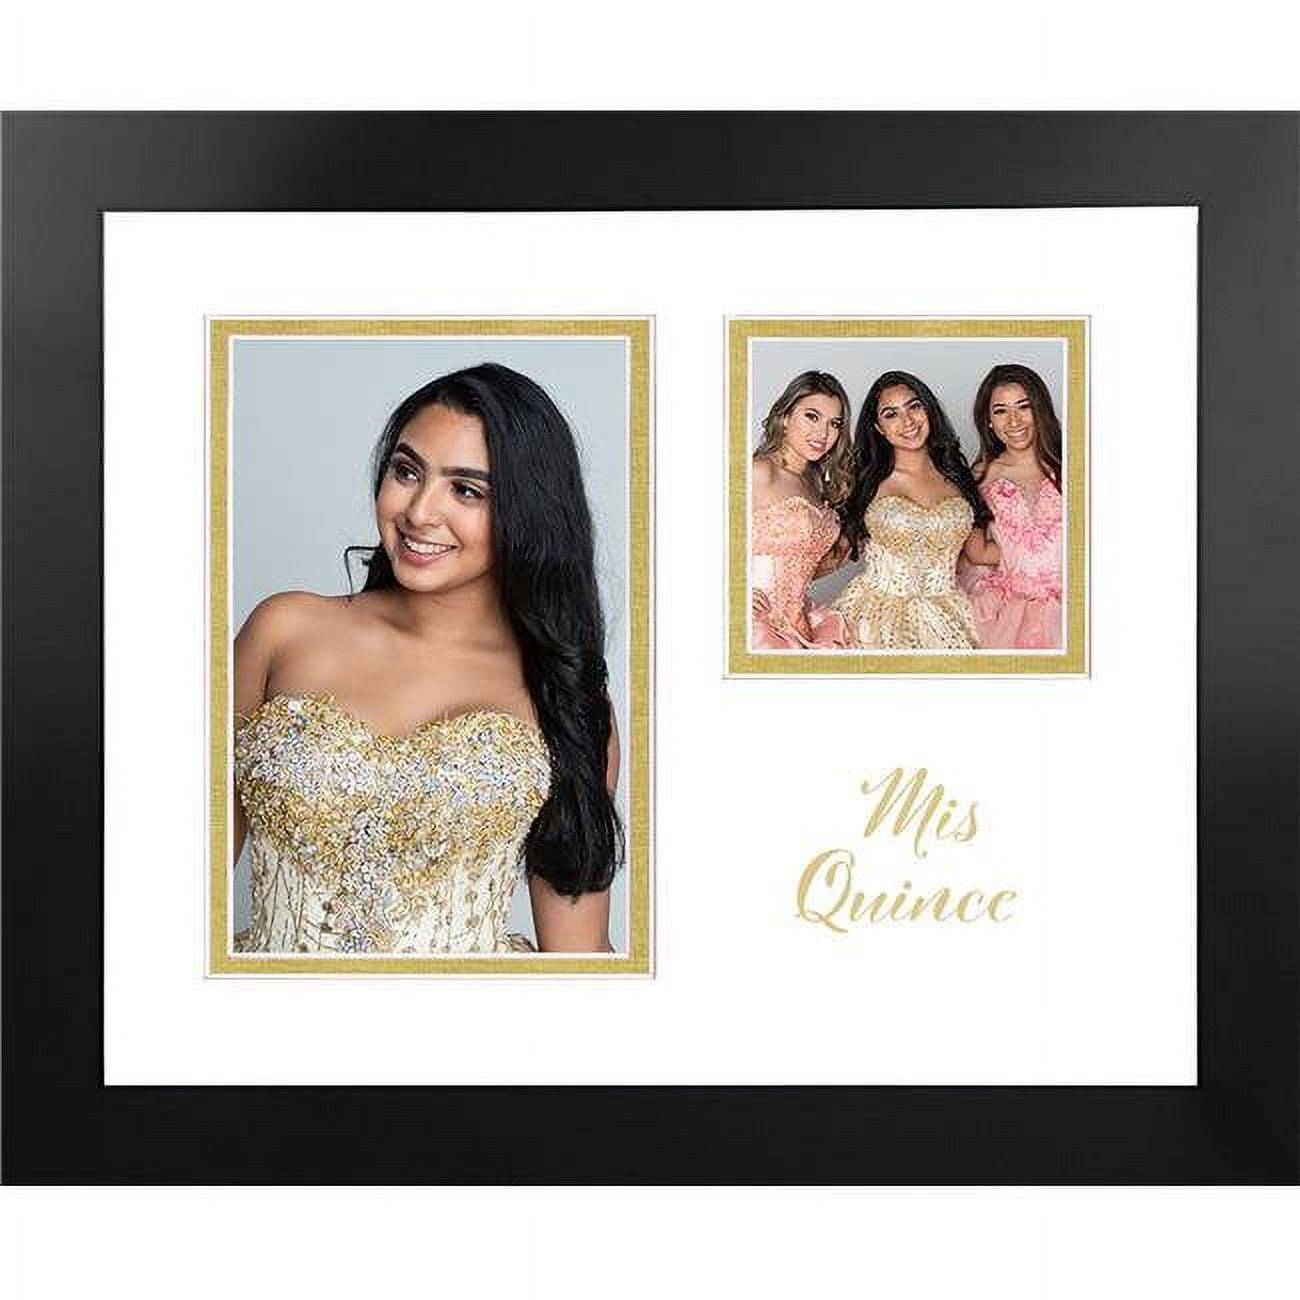 Mqnbwgdo Mis Quince Double Opening Photo Frame White & Gold Mat - Gold Imprint